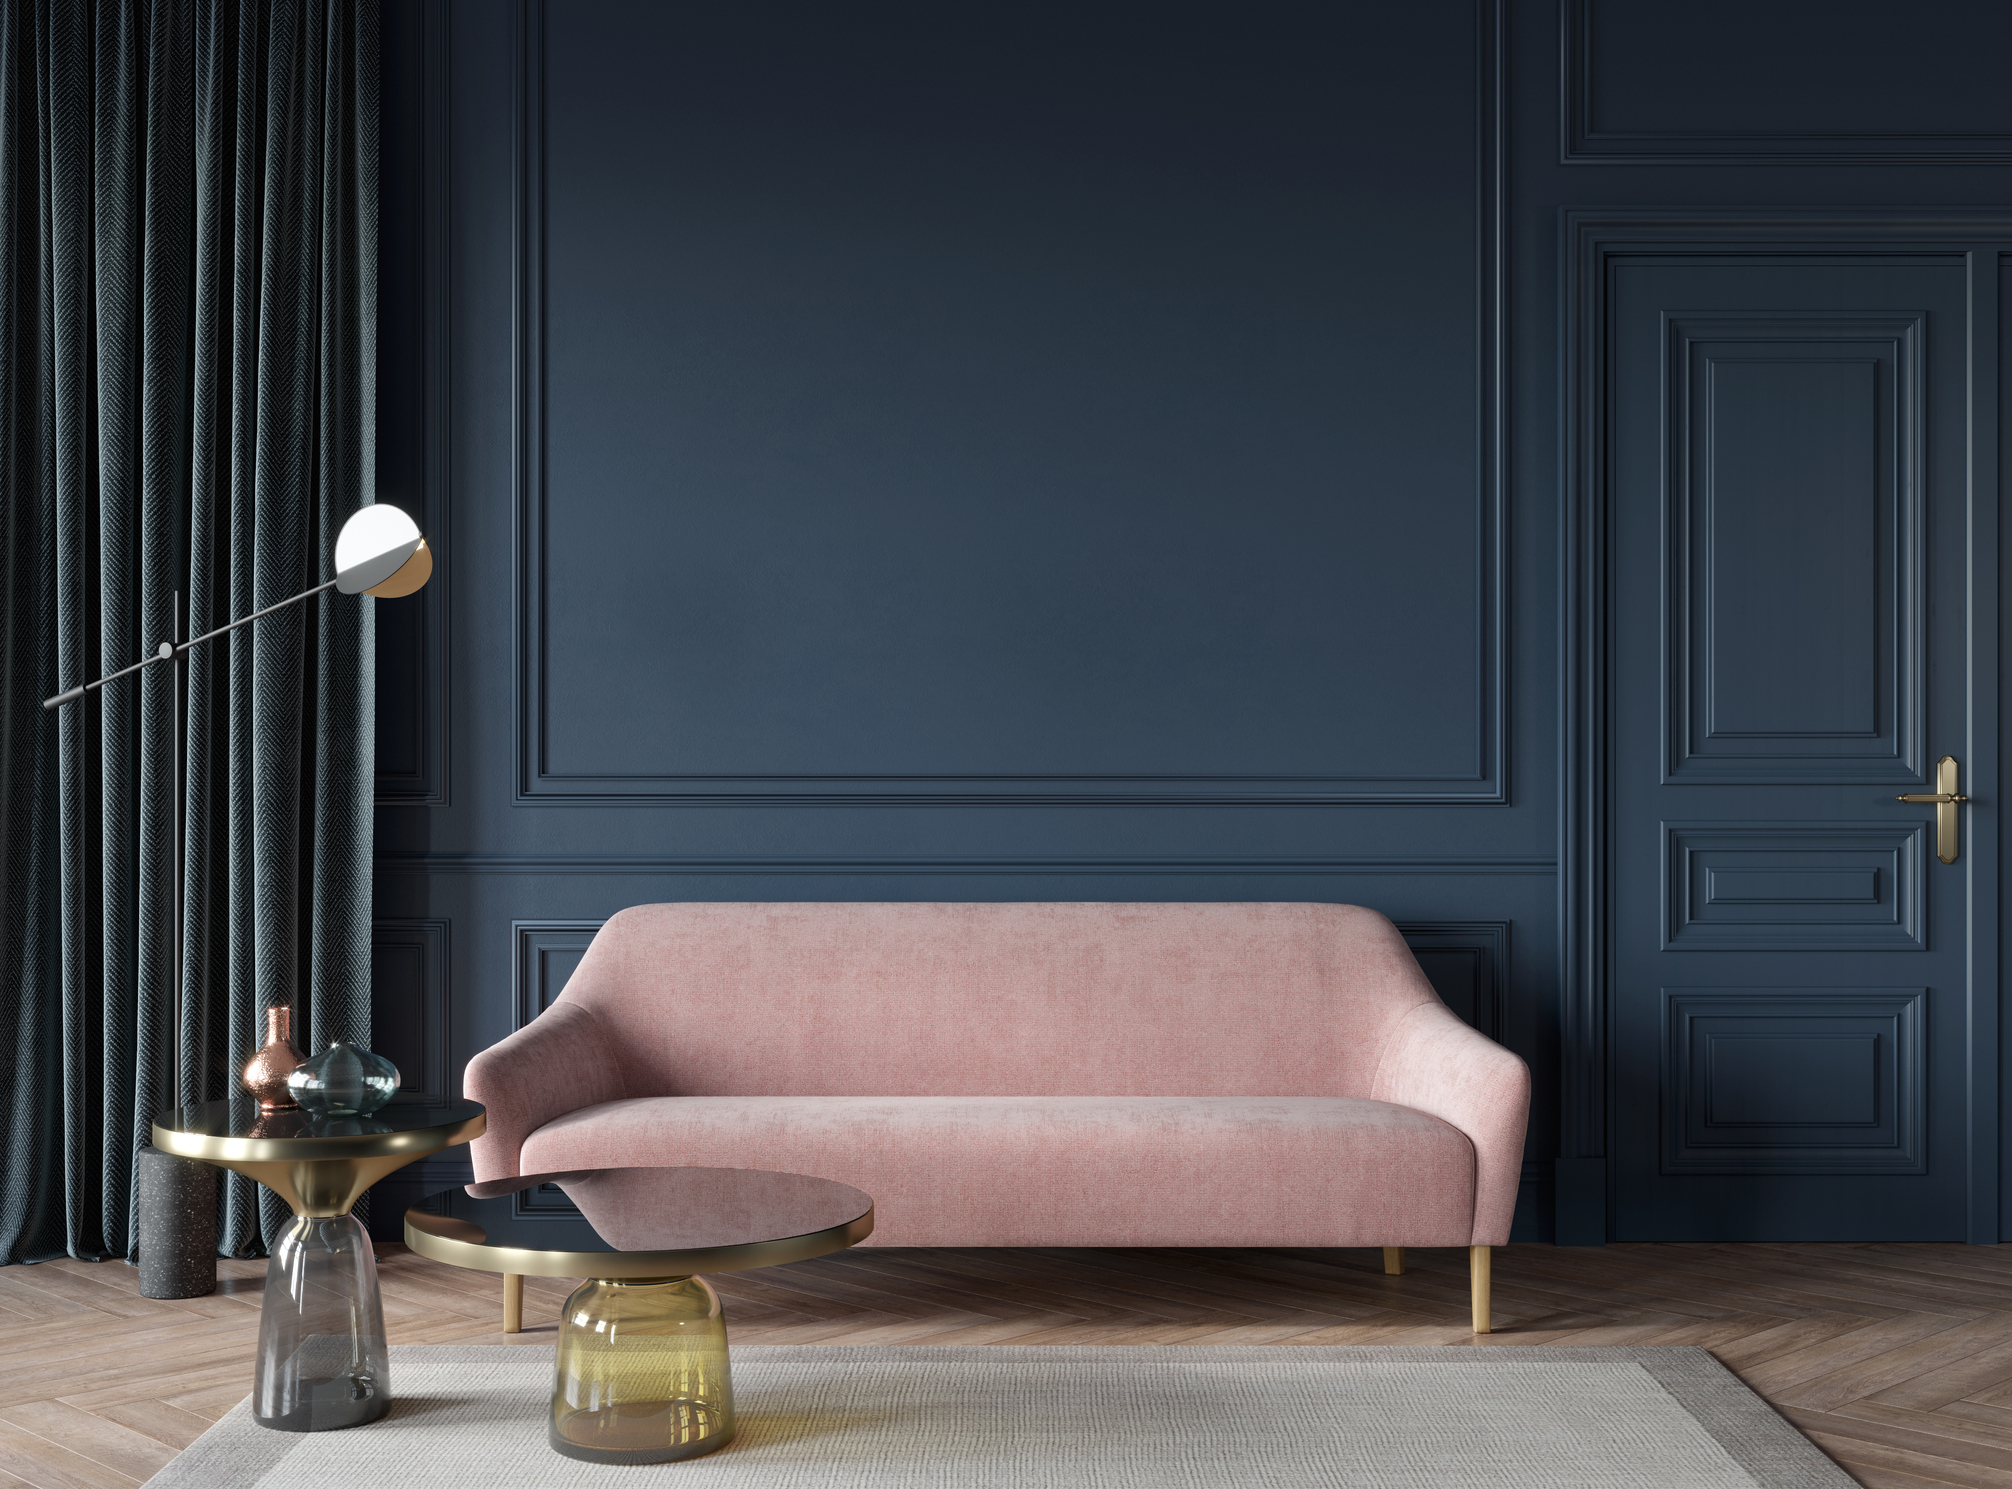 Stylish living room interior in dark blue with a pink sofa, glass tables and a golden floor lamp. Mid century modern style / 3D illustration, 3d render